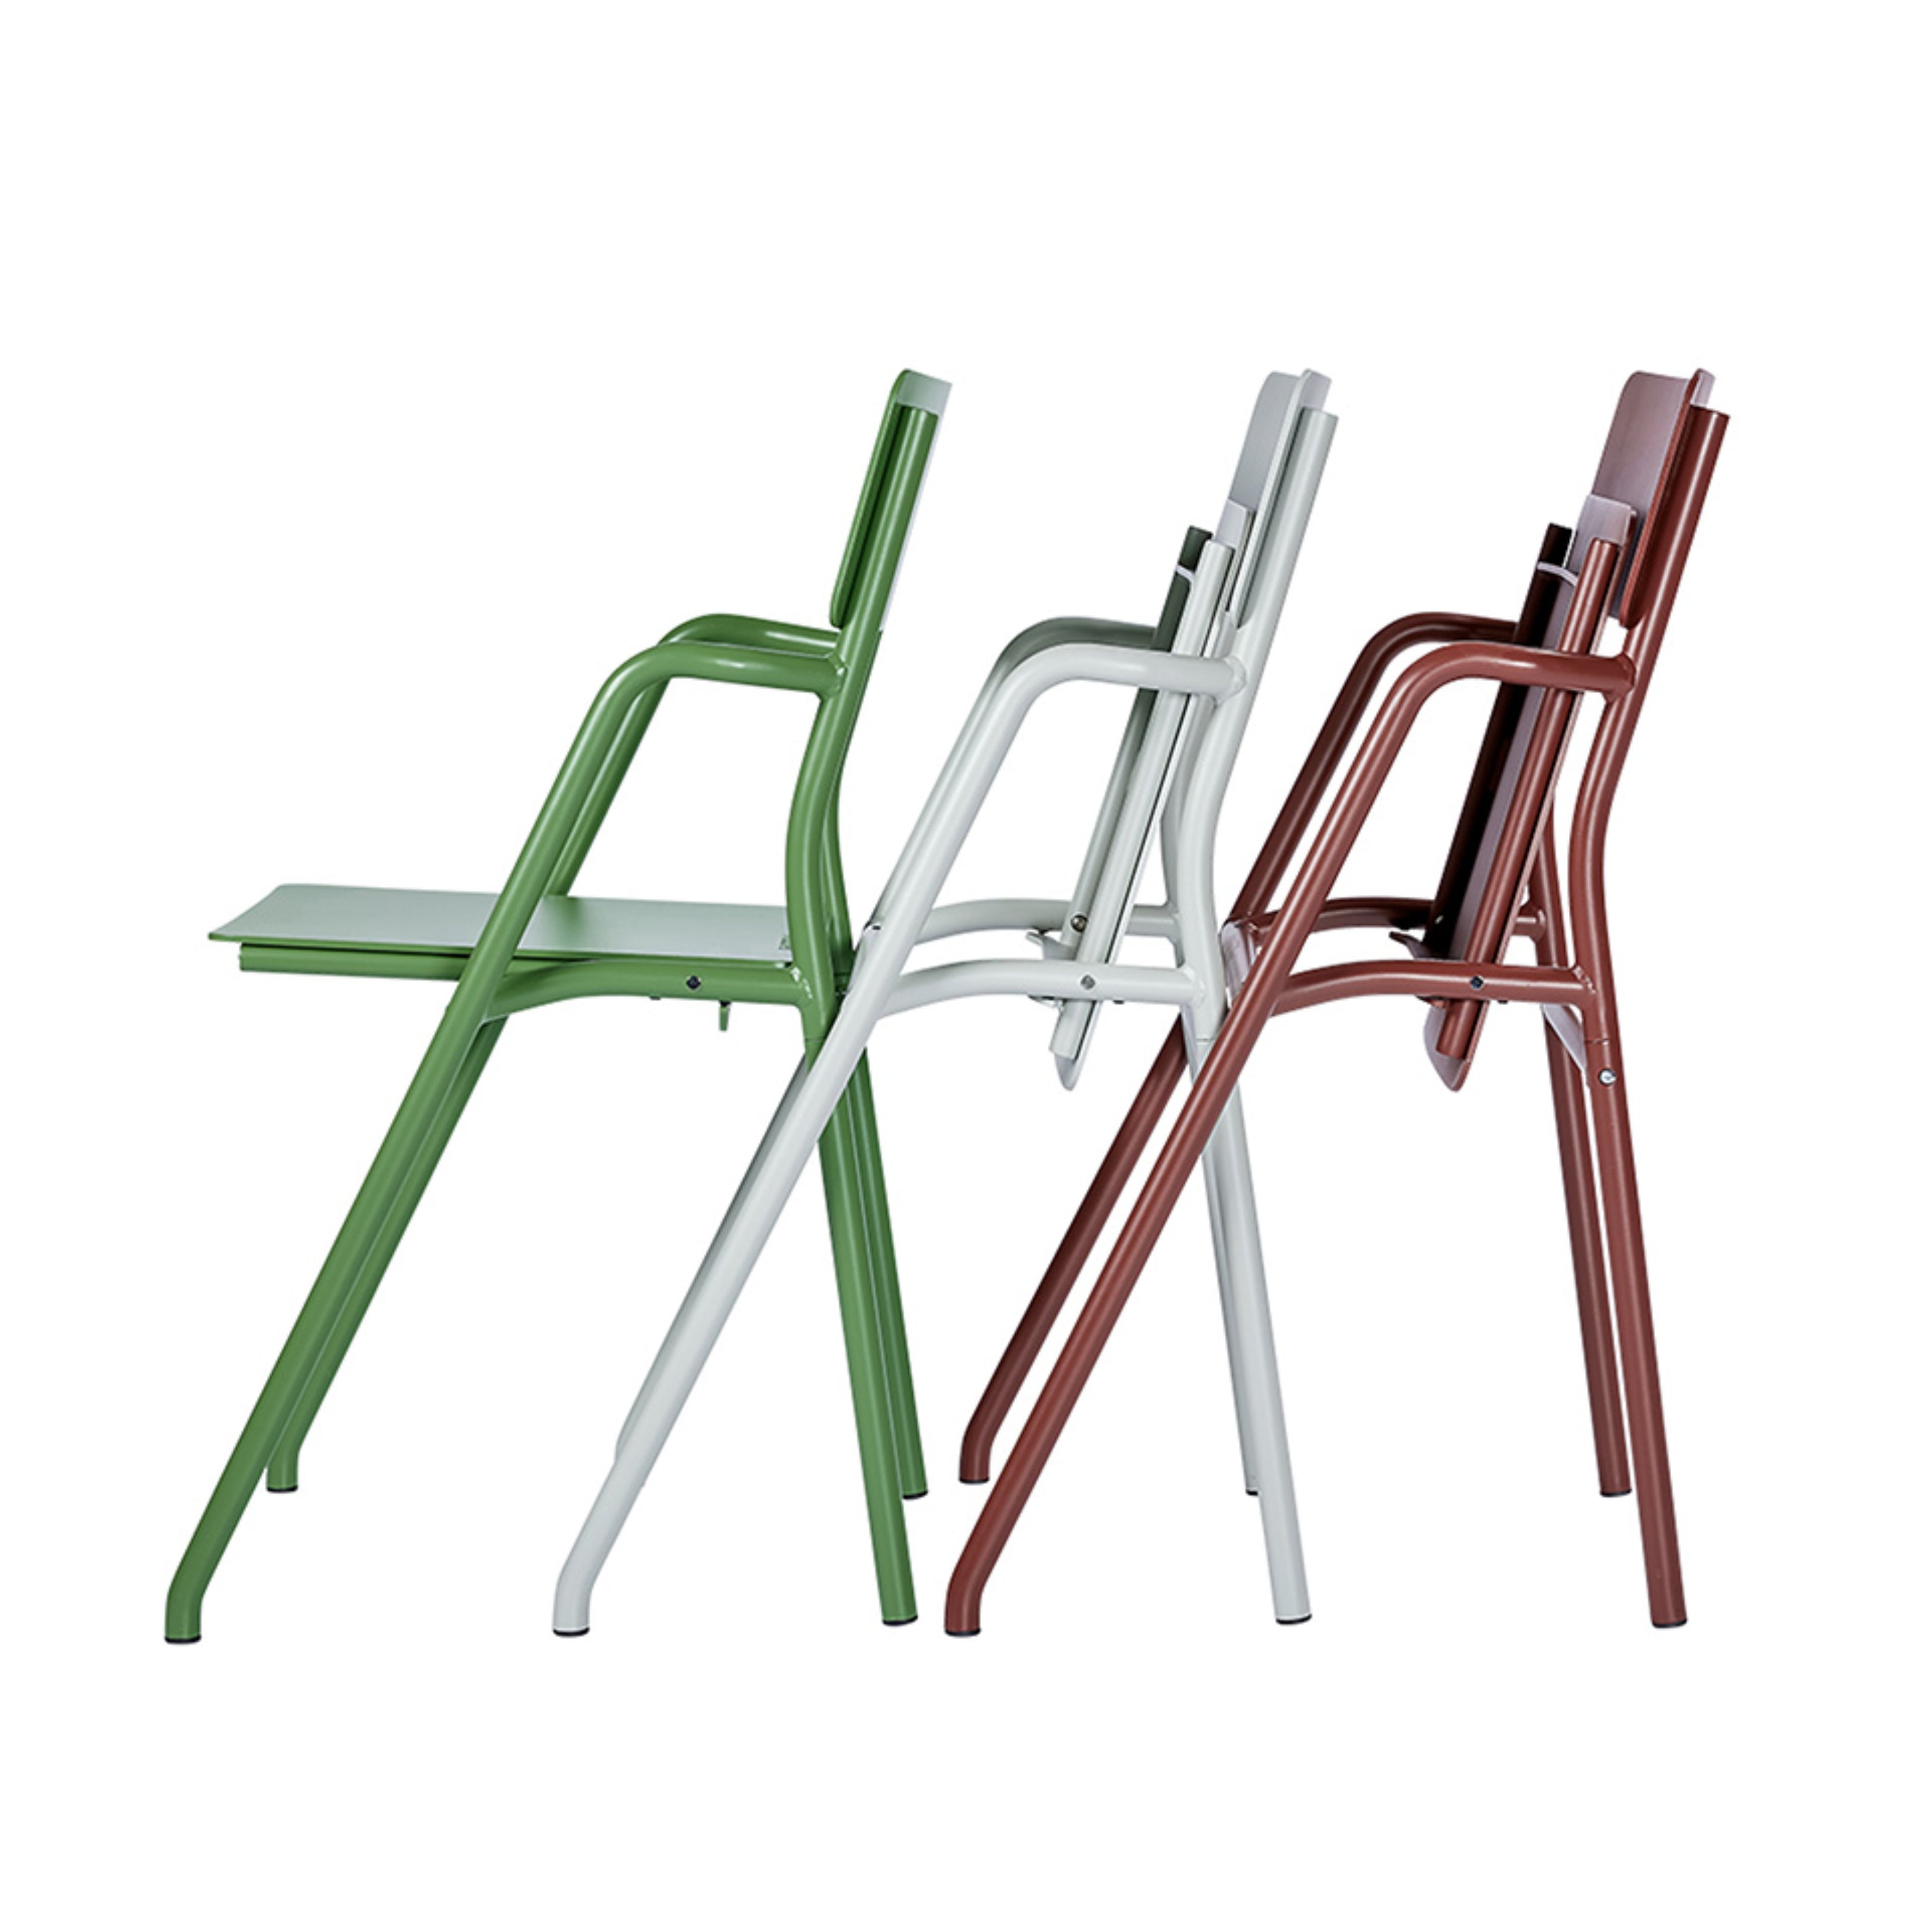 Flip-Up Chair: Reseda green + Agate Grey + Oxide Red